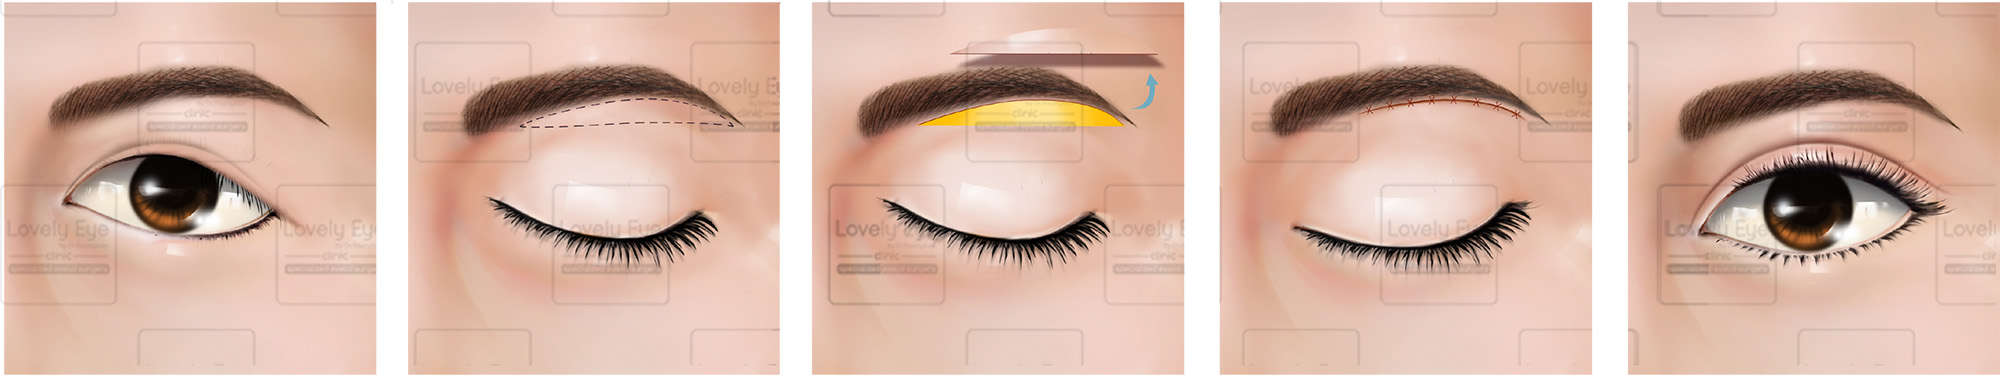 Various treatments for droopy eyes by Lovely Eye & Skin Clinic’s technique